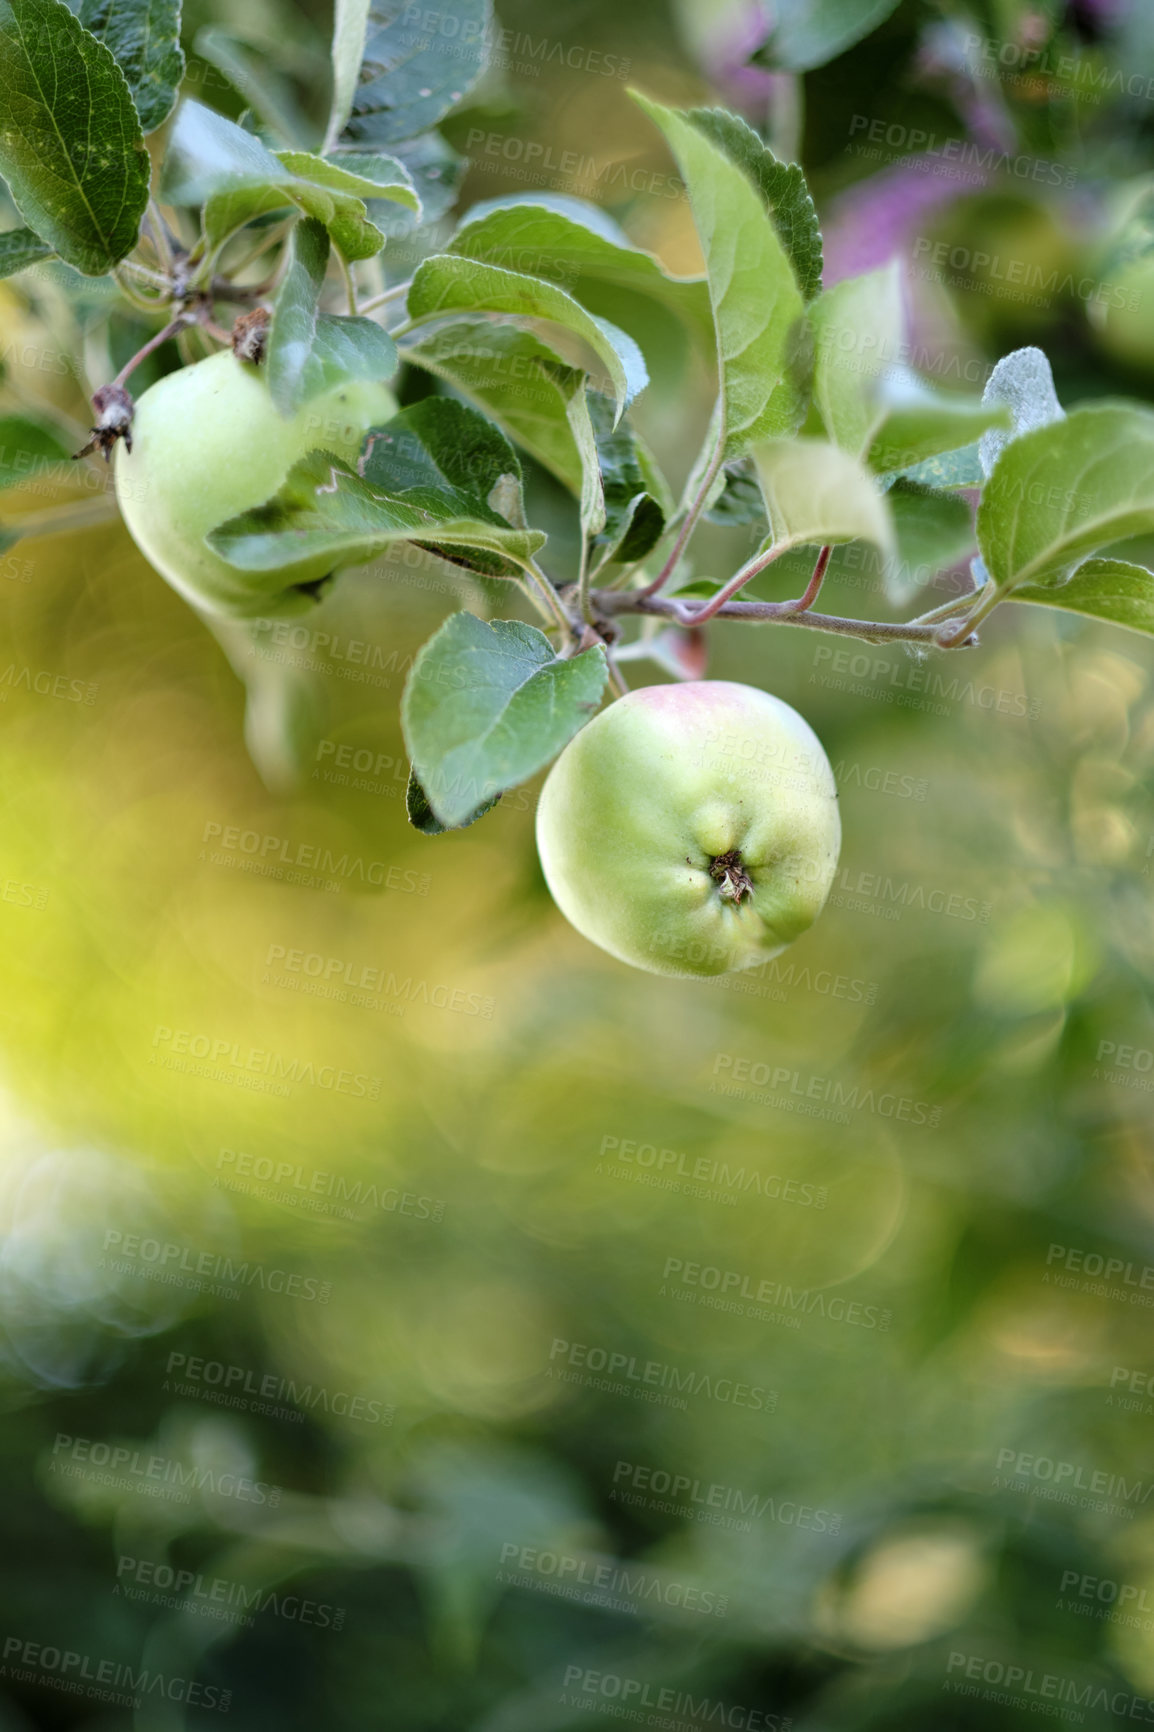 Buy stock photo Organic fruit growing on an orchard on a sustainable farm during harvesting season with copy space. Delicious green apples hanging on a tree in an eco friendly environment with a blurred background